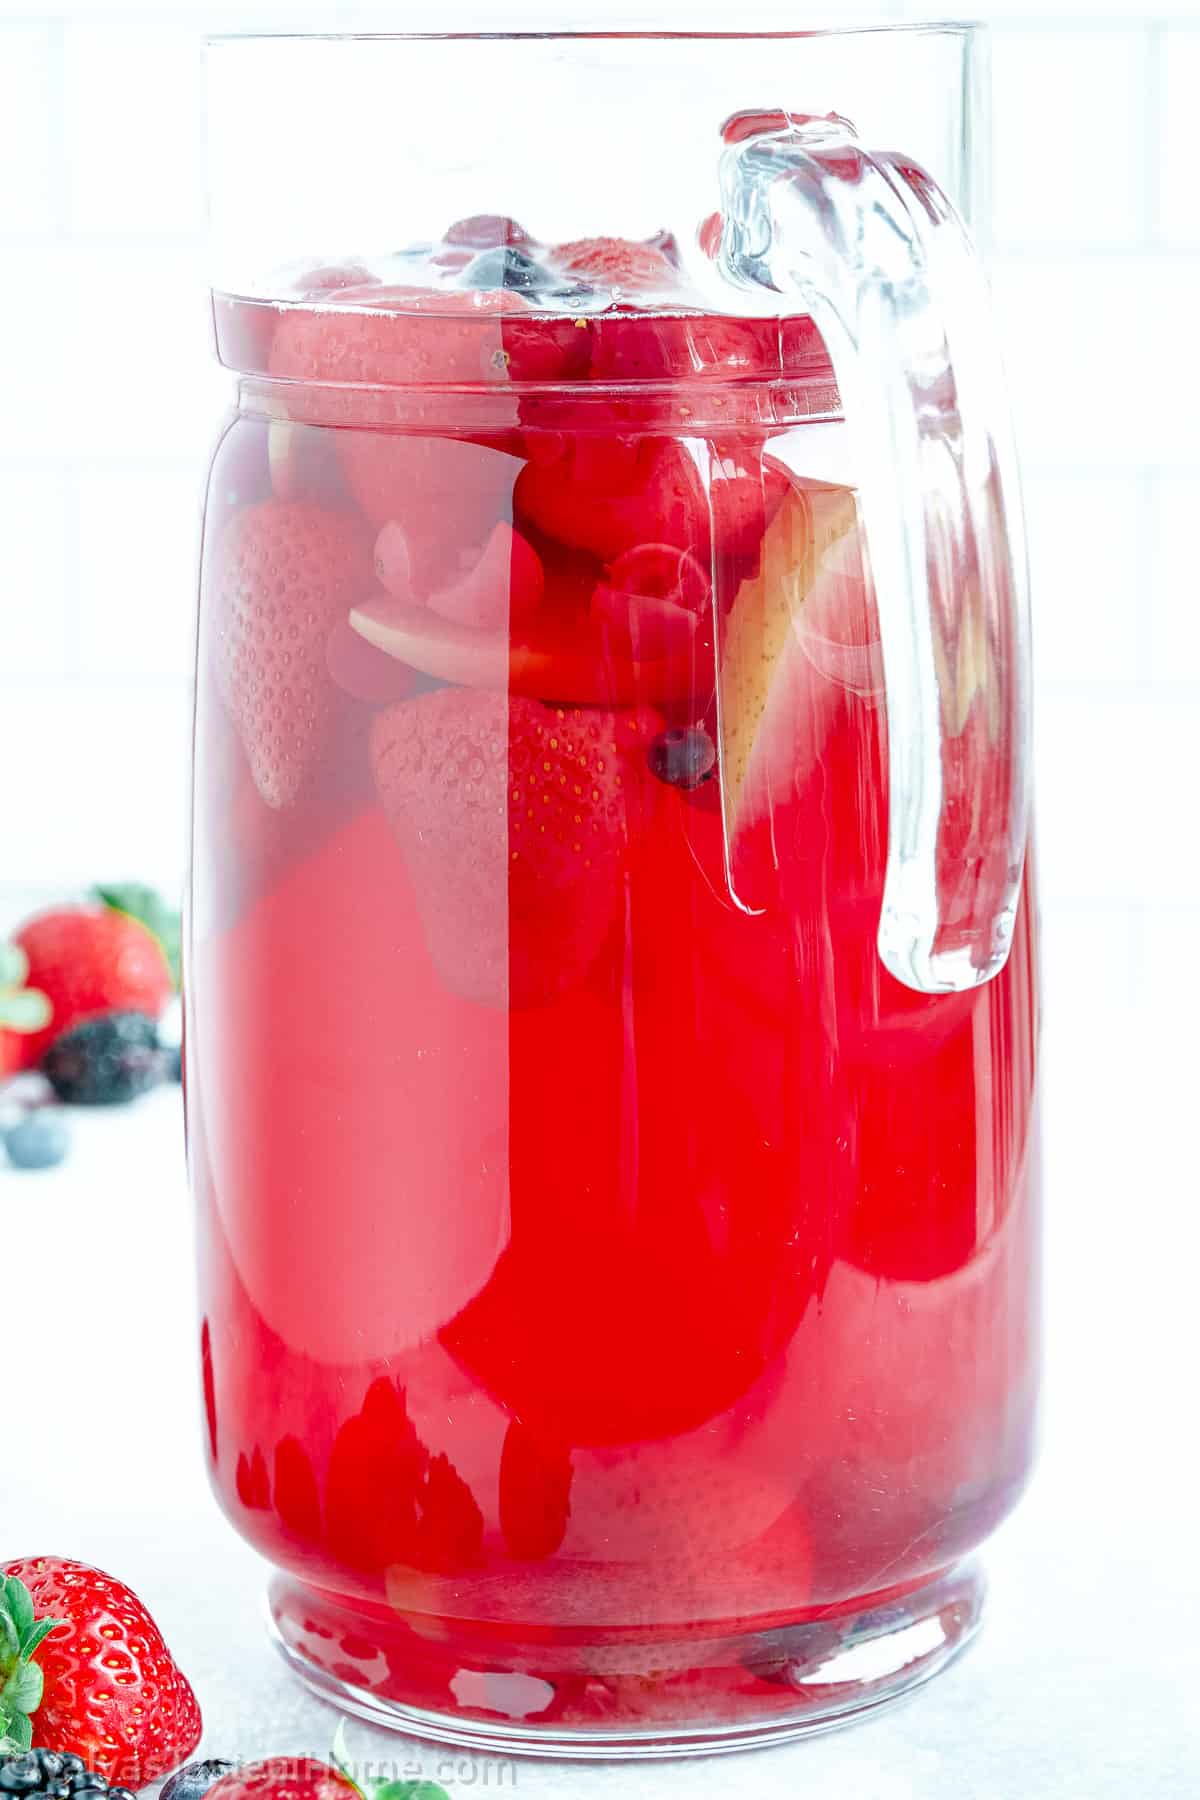 Making Kompot at home is a great way to use up any leftover fruit you have, and it is a healthier alternative to store-bought juices.